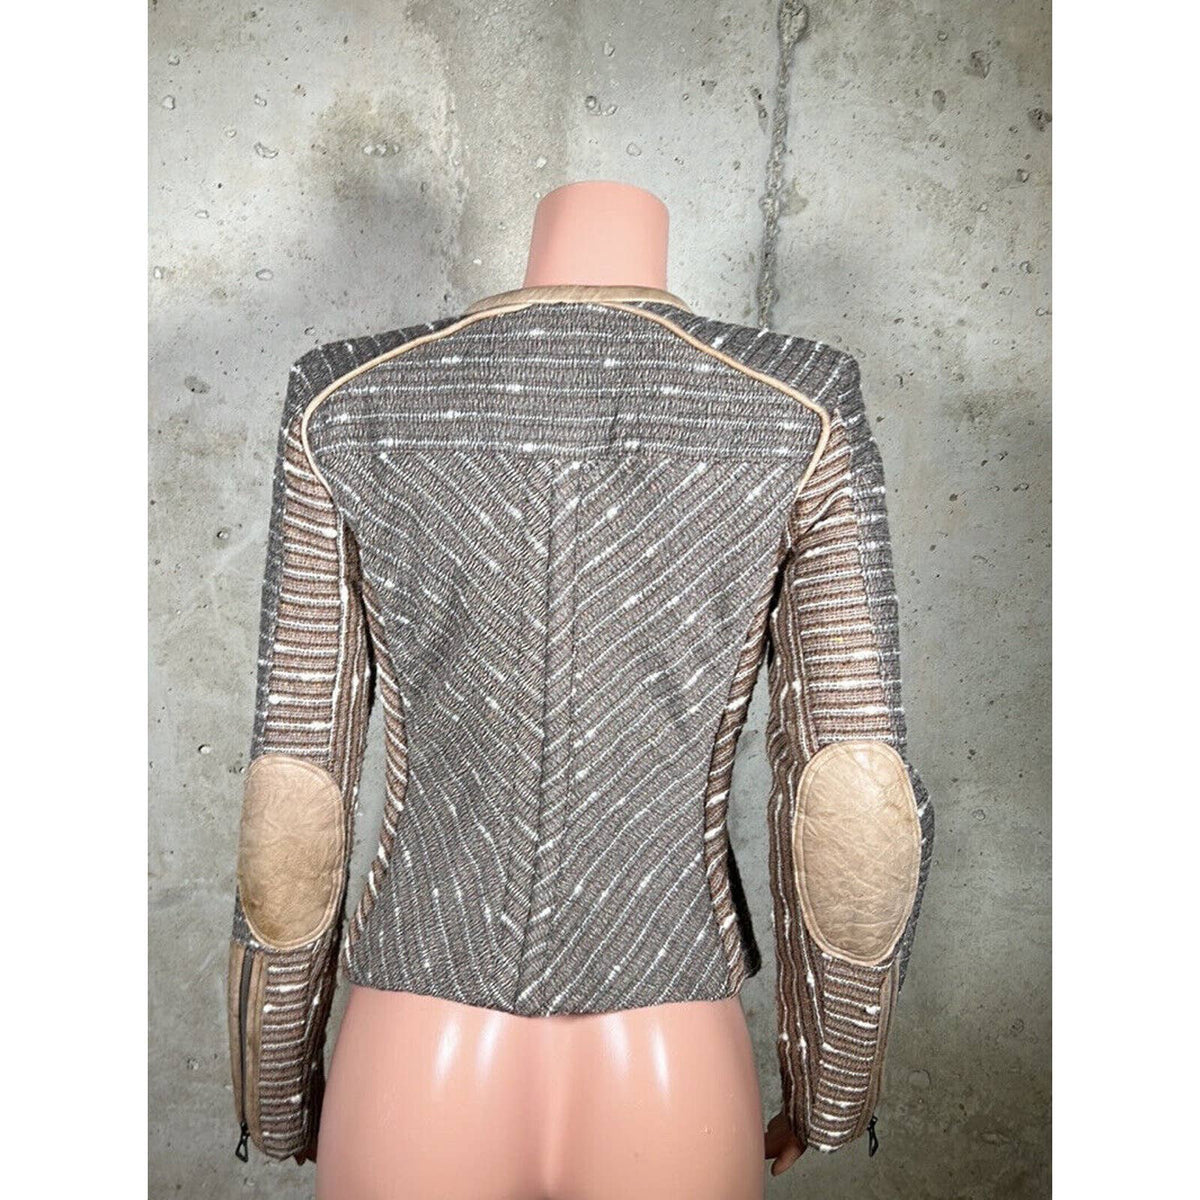 Isabel Marant Brown Knit Wool and Leather Jacket Sz.3